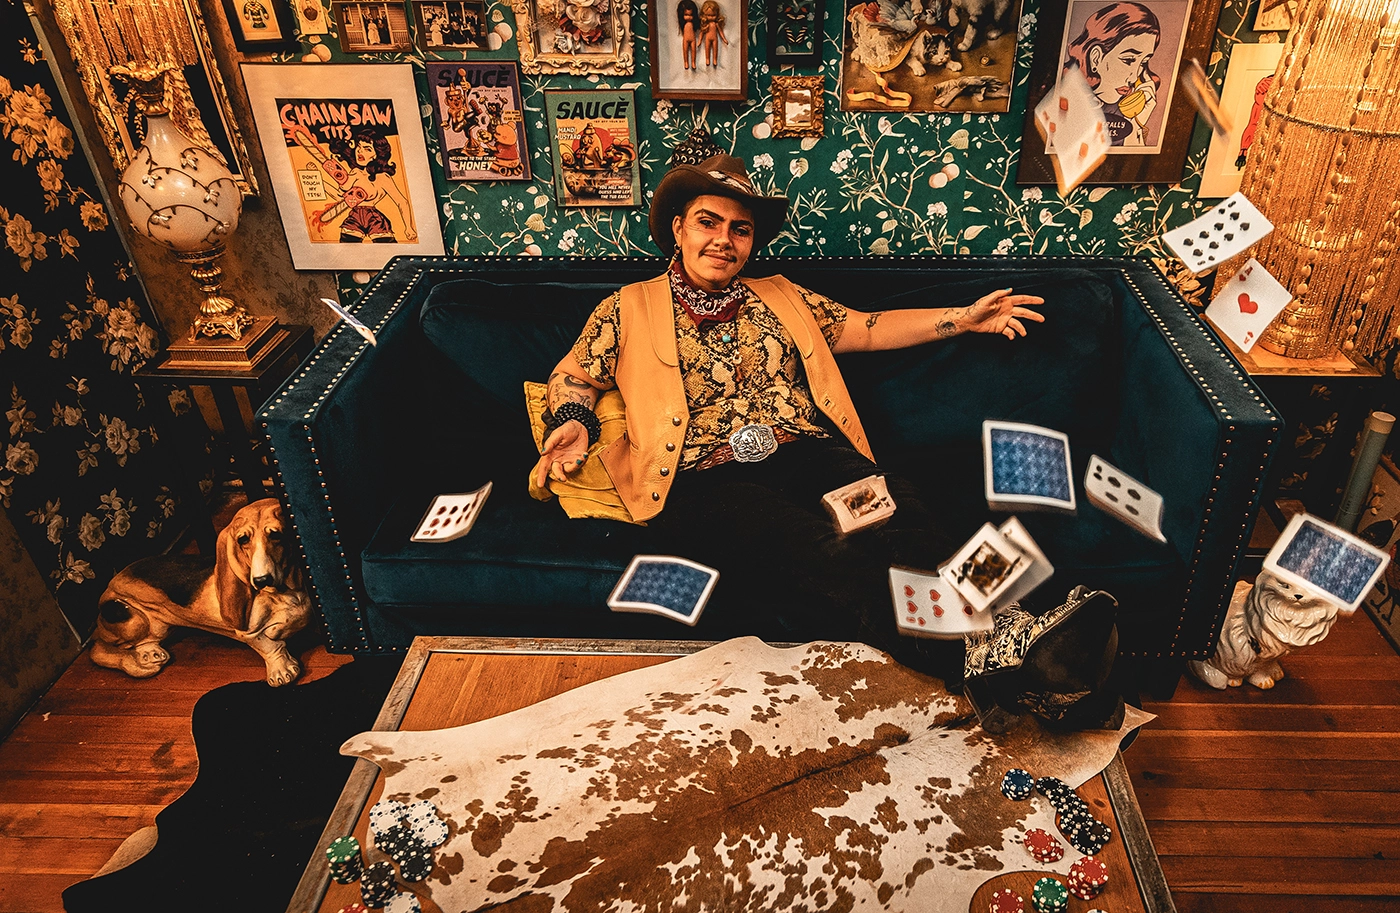 Heller Highwater leans across a sofa surrounded by playing cards and a cow skin rug.